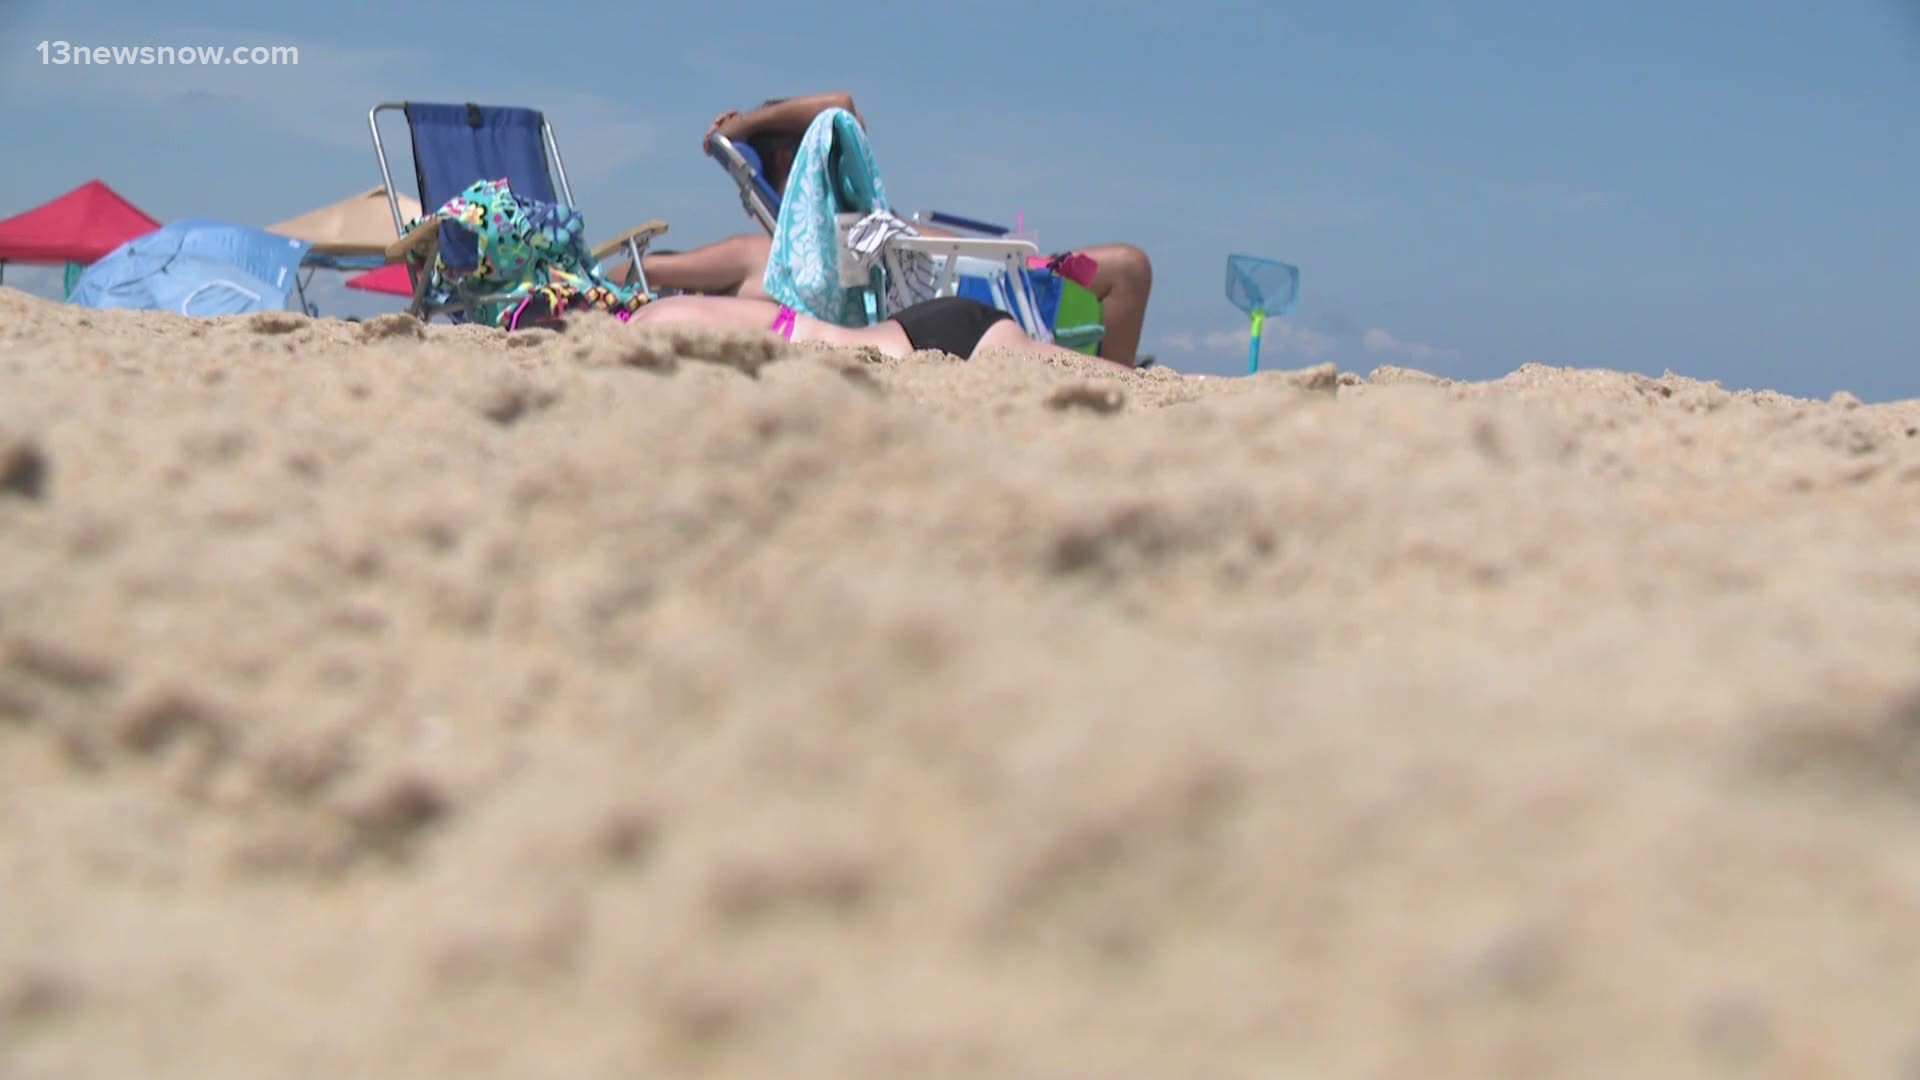 Emergency teams on the Outer Banks say preparations will be ready for before Tropical Storm Isaias rolls through the area.